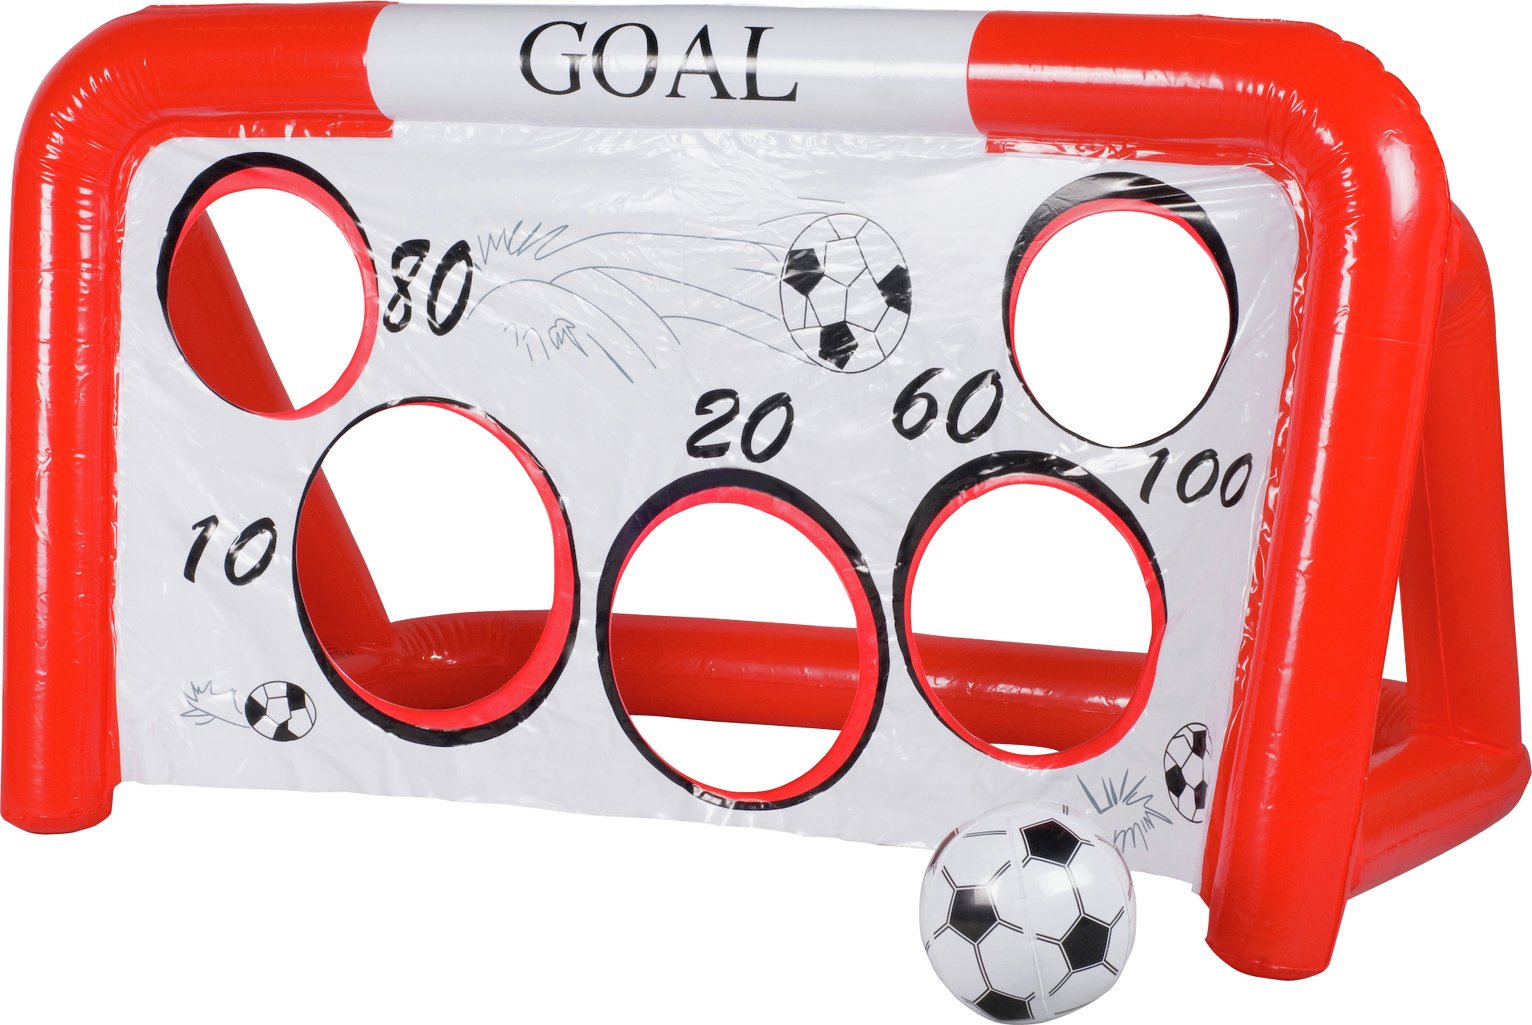 Chad Valley Inflatable Goal Set Review